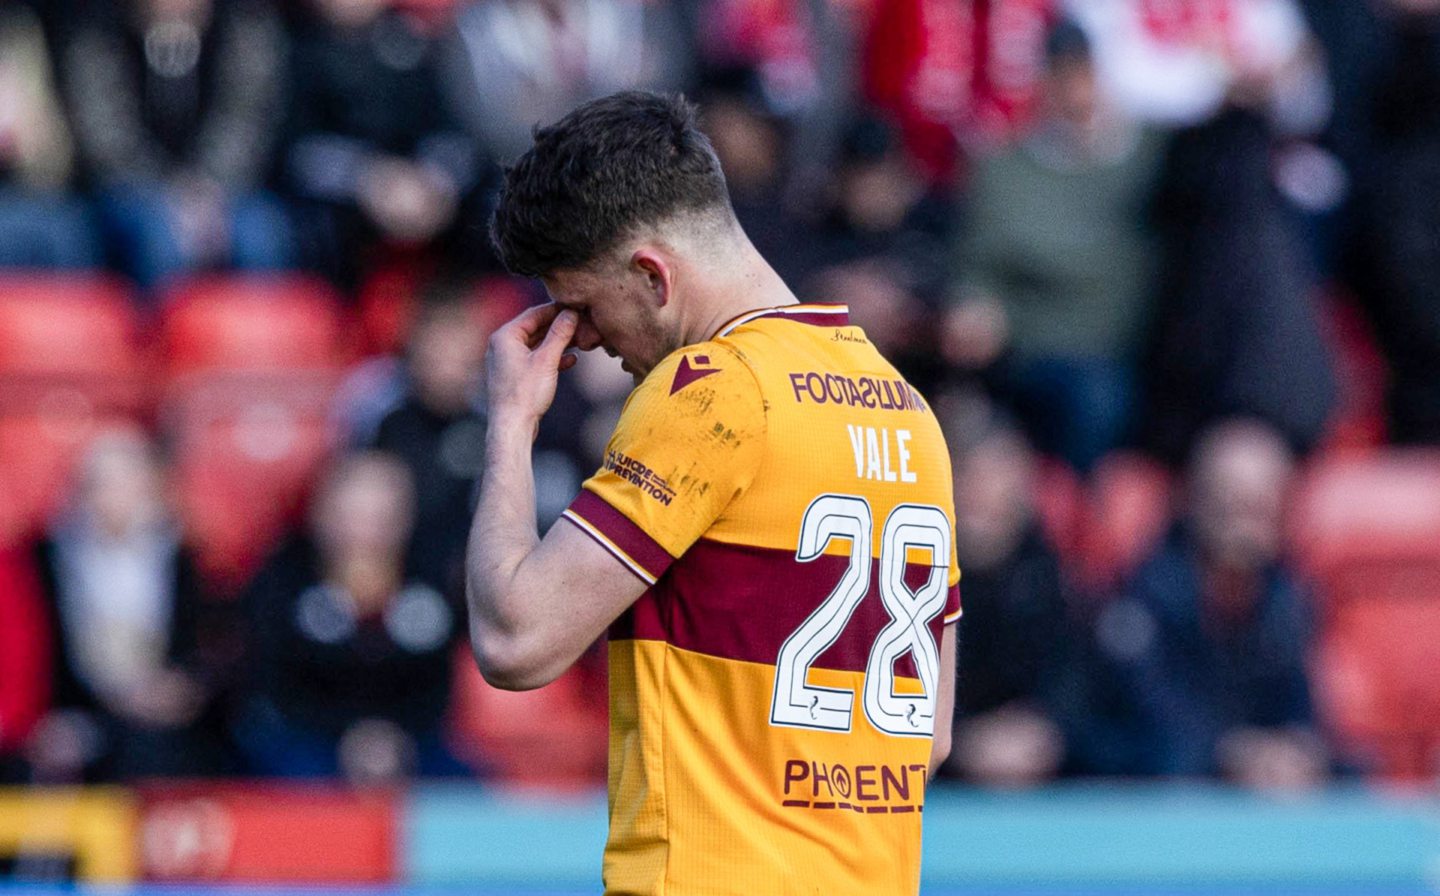 Motherwell's Jack Vale looks dejected after he is shown a red card against Aberdeen. Image: SNS